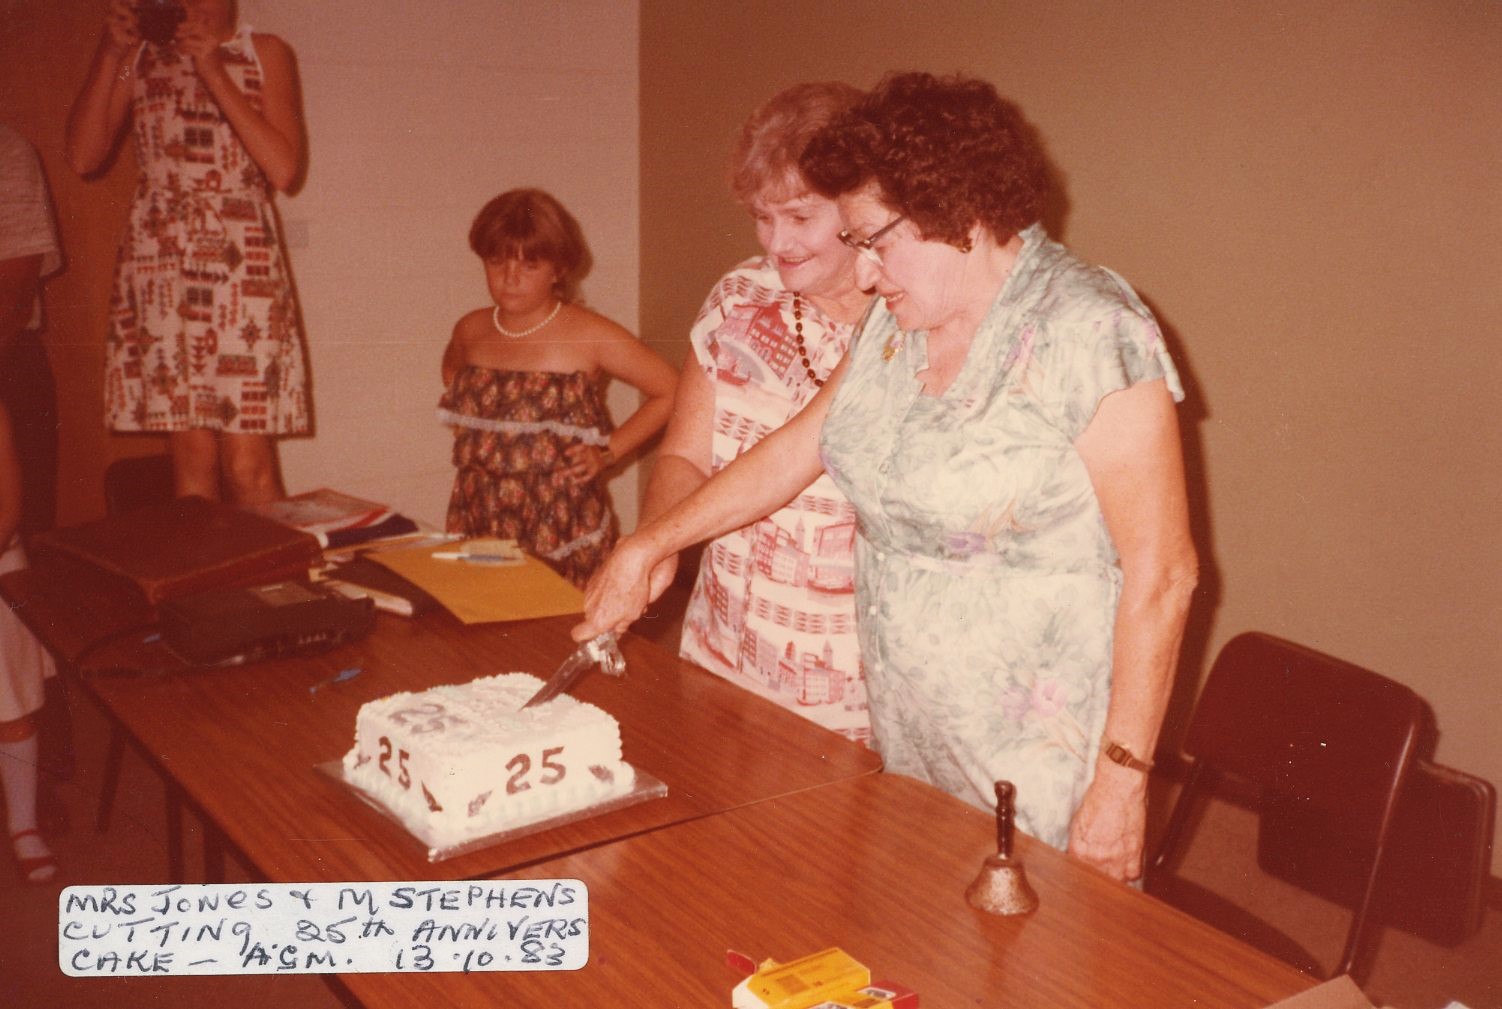 Cairns historical society cutting cake for 25 year anniversary